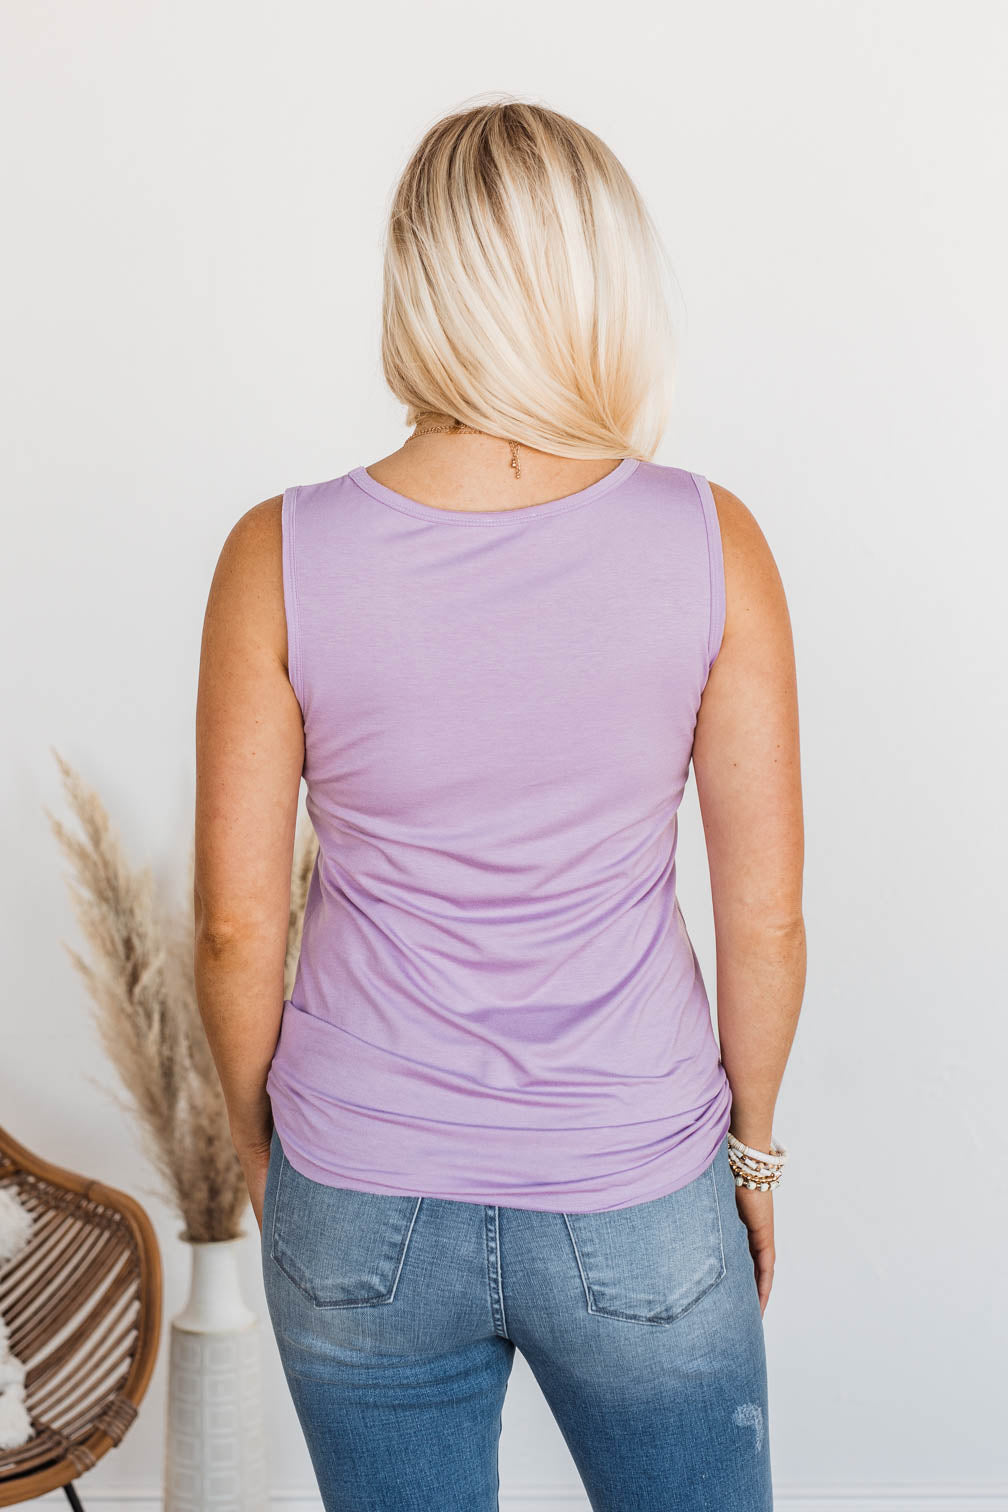 Meant What I Said Criss-Cross Tank- Violet